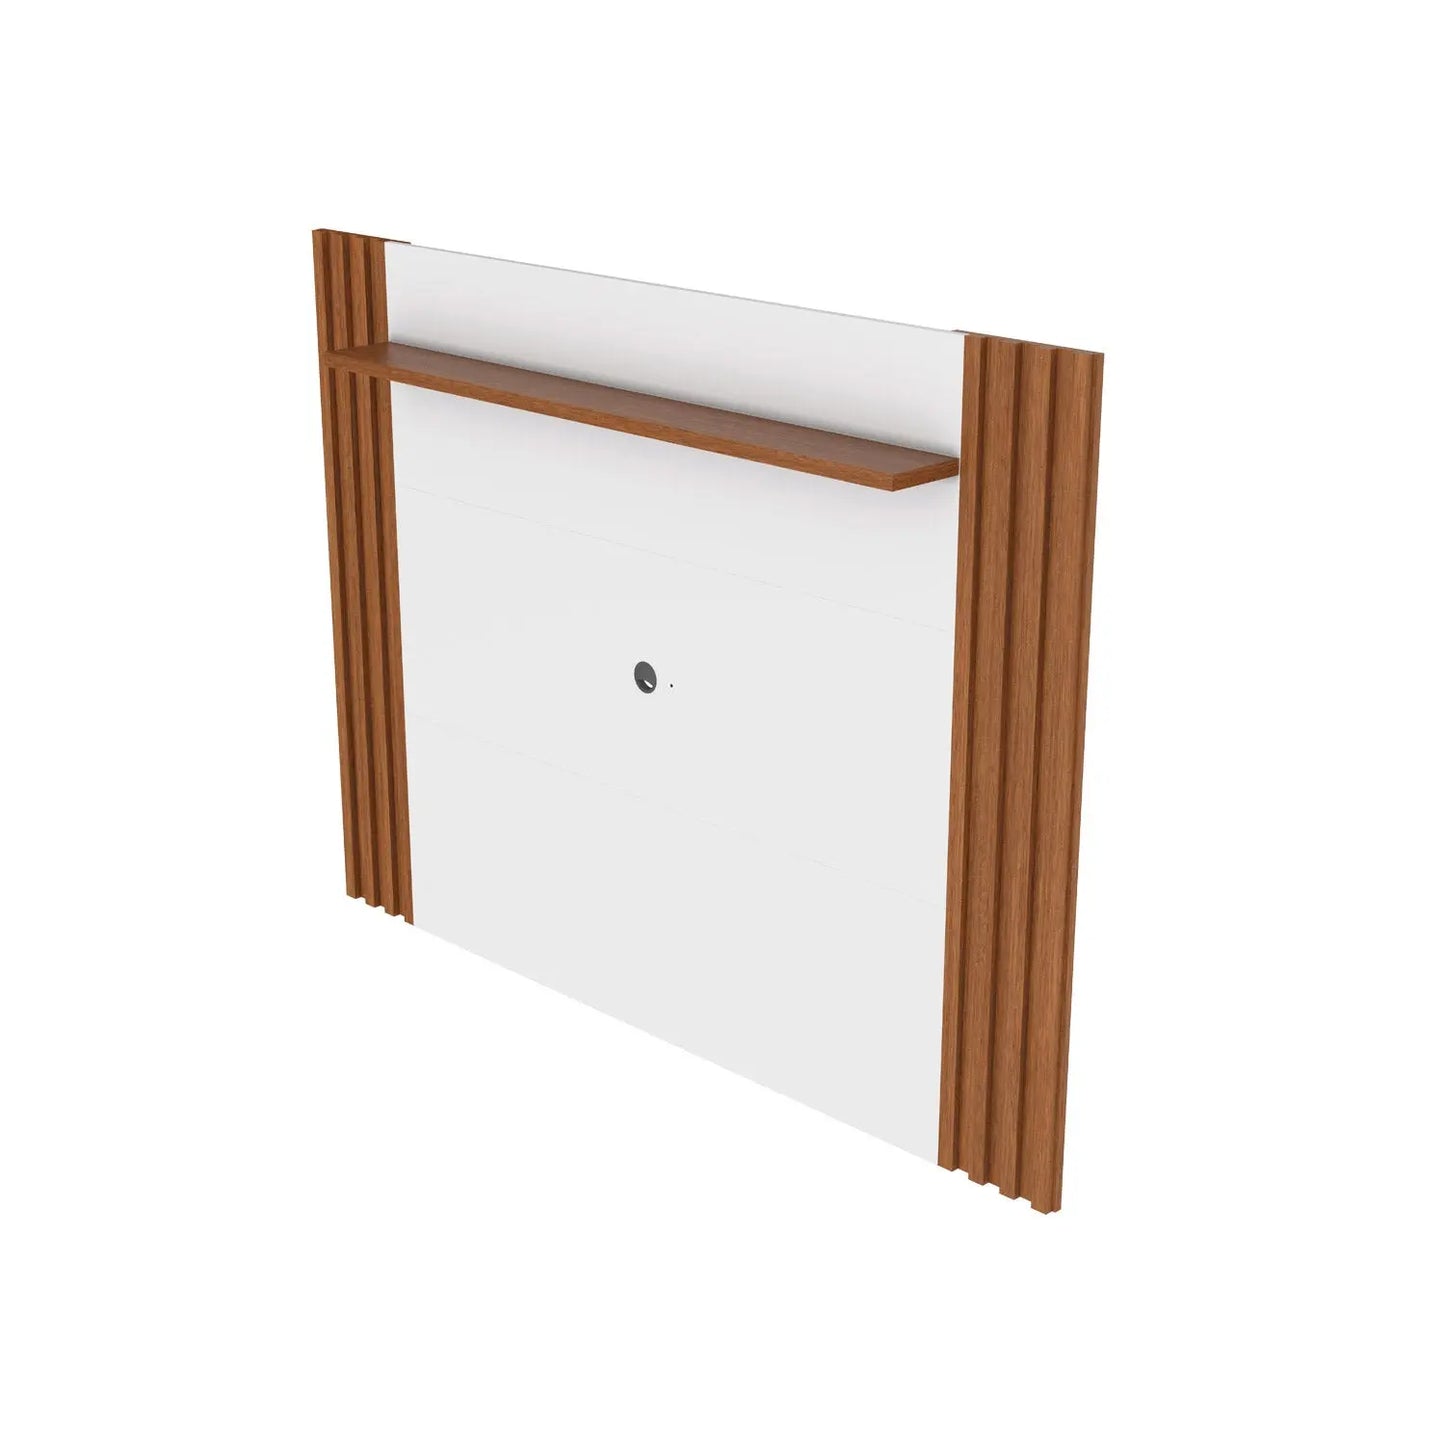 Homedock Painel para TV Allure 180 cm - Natural c/ Branco Gloss Moveis